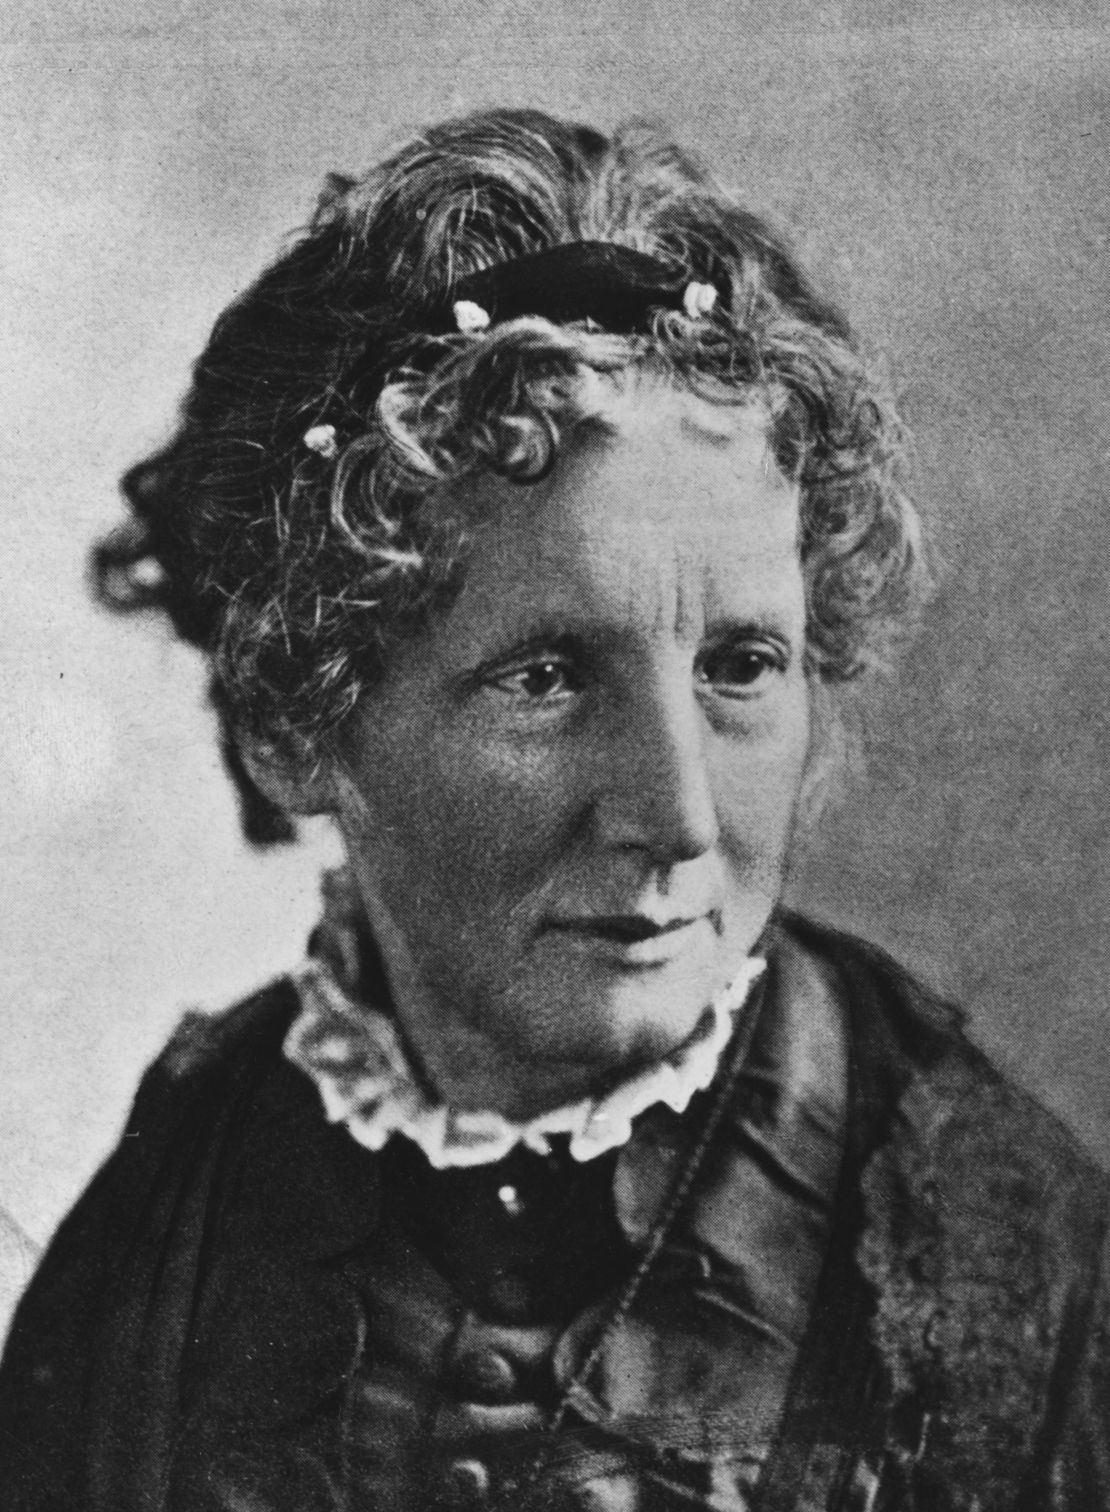 Harriet Beecher Stowe's best-selling novel "Uncle Tom's Cabin" popularized the anti-slavery campaign. 